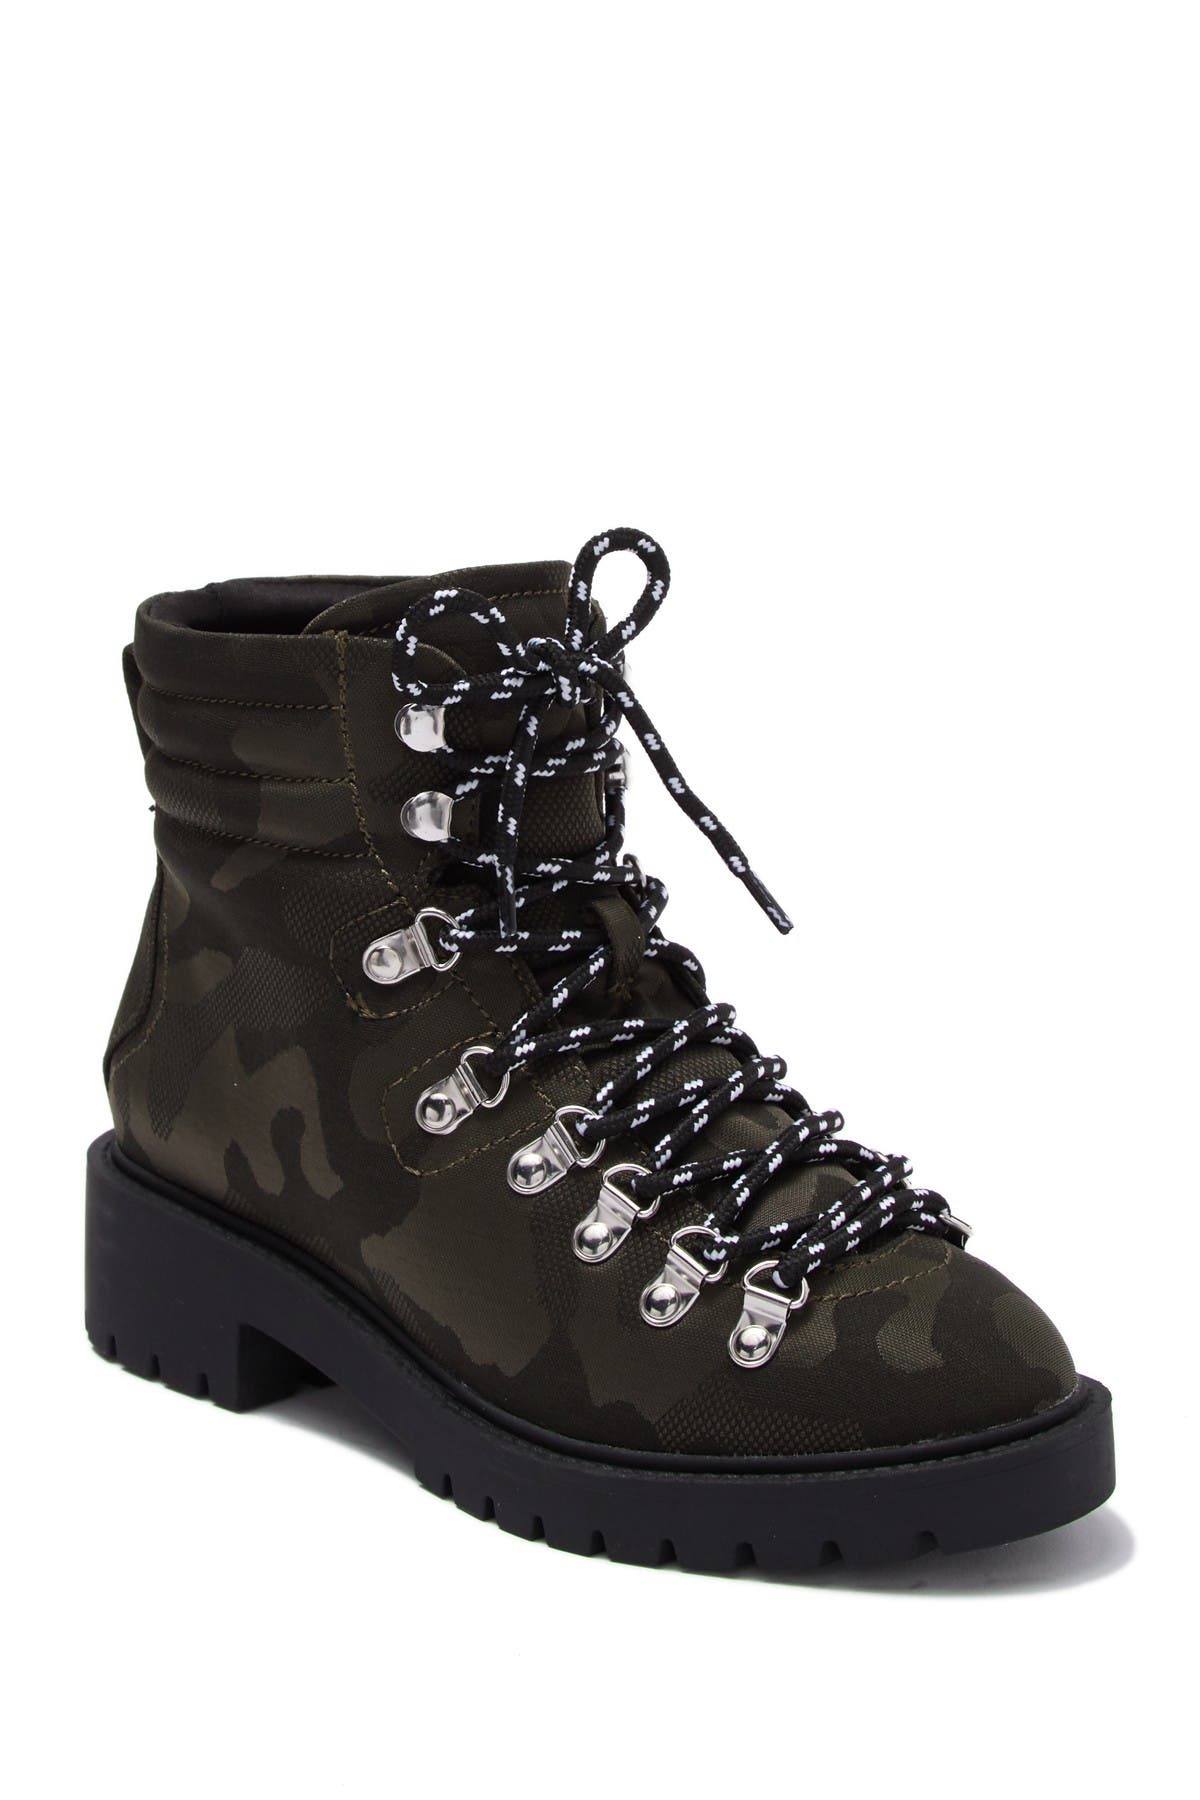 steve madden lace up combat boots